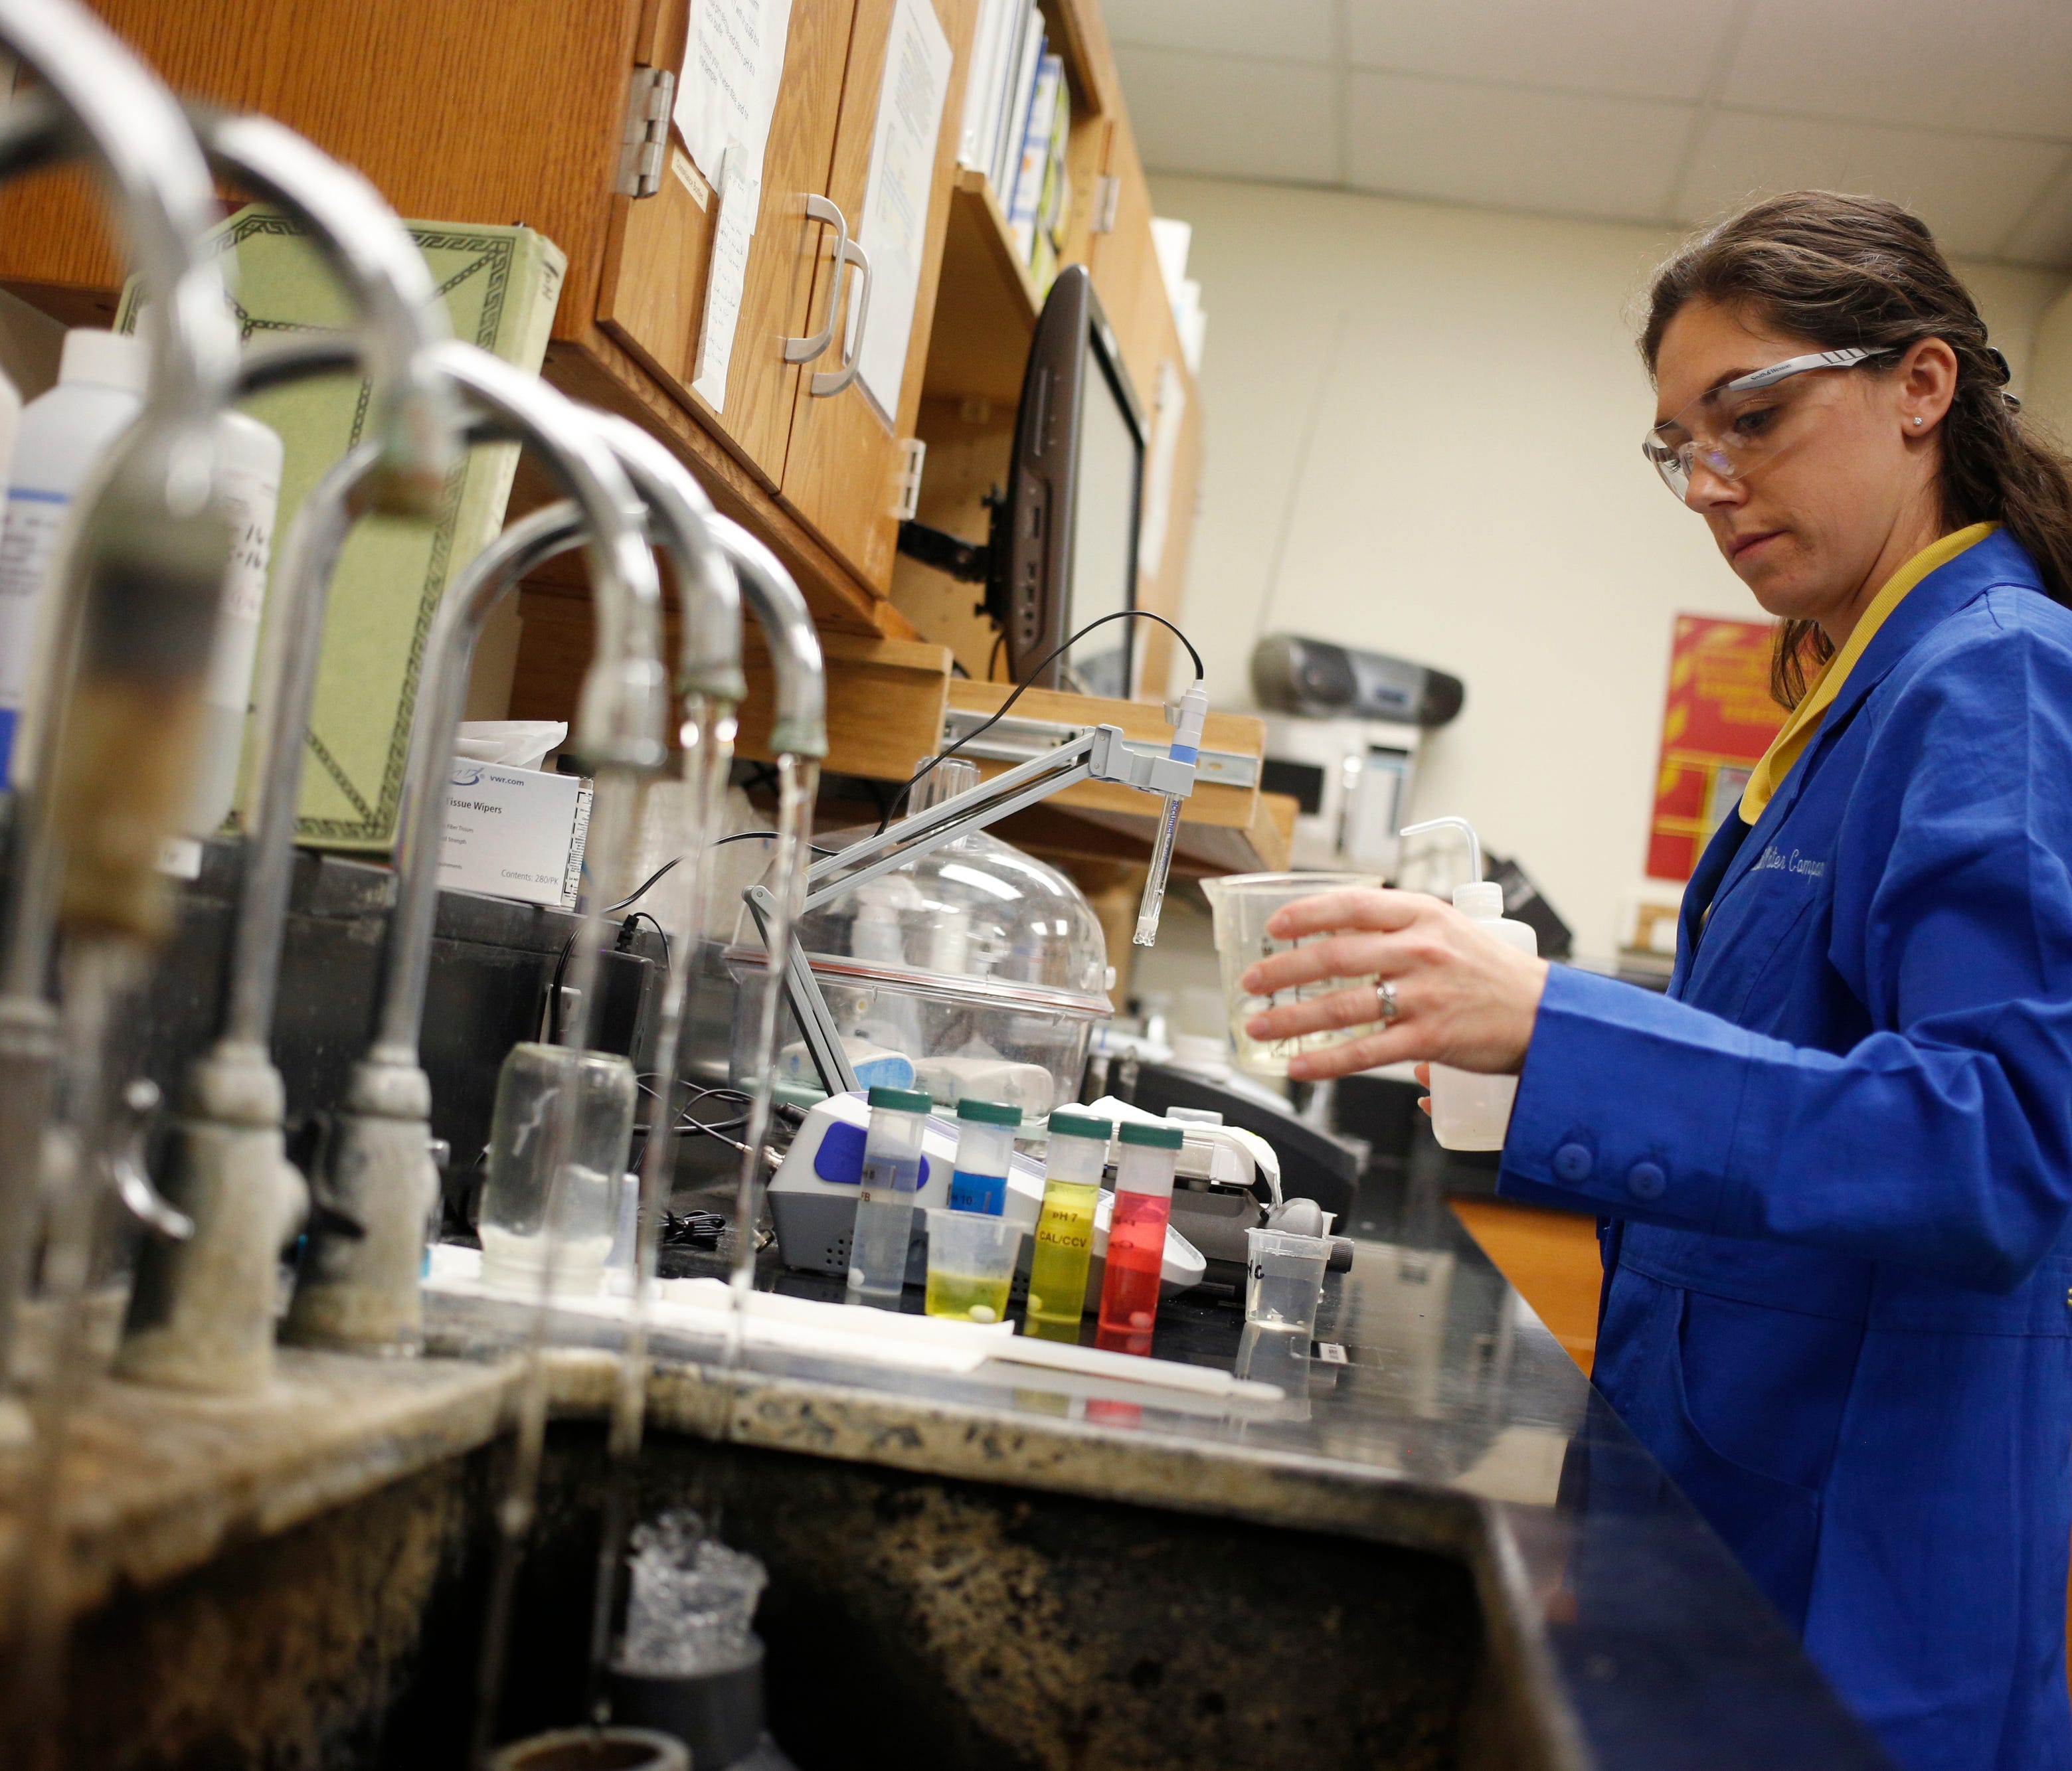 4/29/16 10:33:18 AM -- Louisville, KY  --   Nicole Estes performs a water quality analysis in a laboratory at the Louisville Water Company's Crescent Hill filter plant on Friday, April 29, 2016 in Louisville, KY.   Looking at the differences and simi